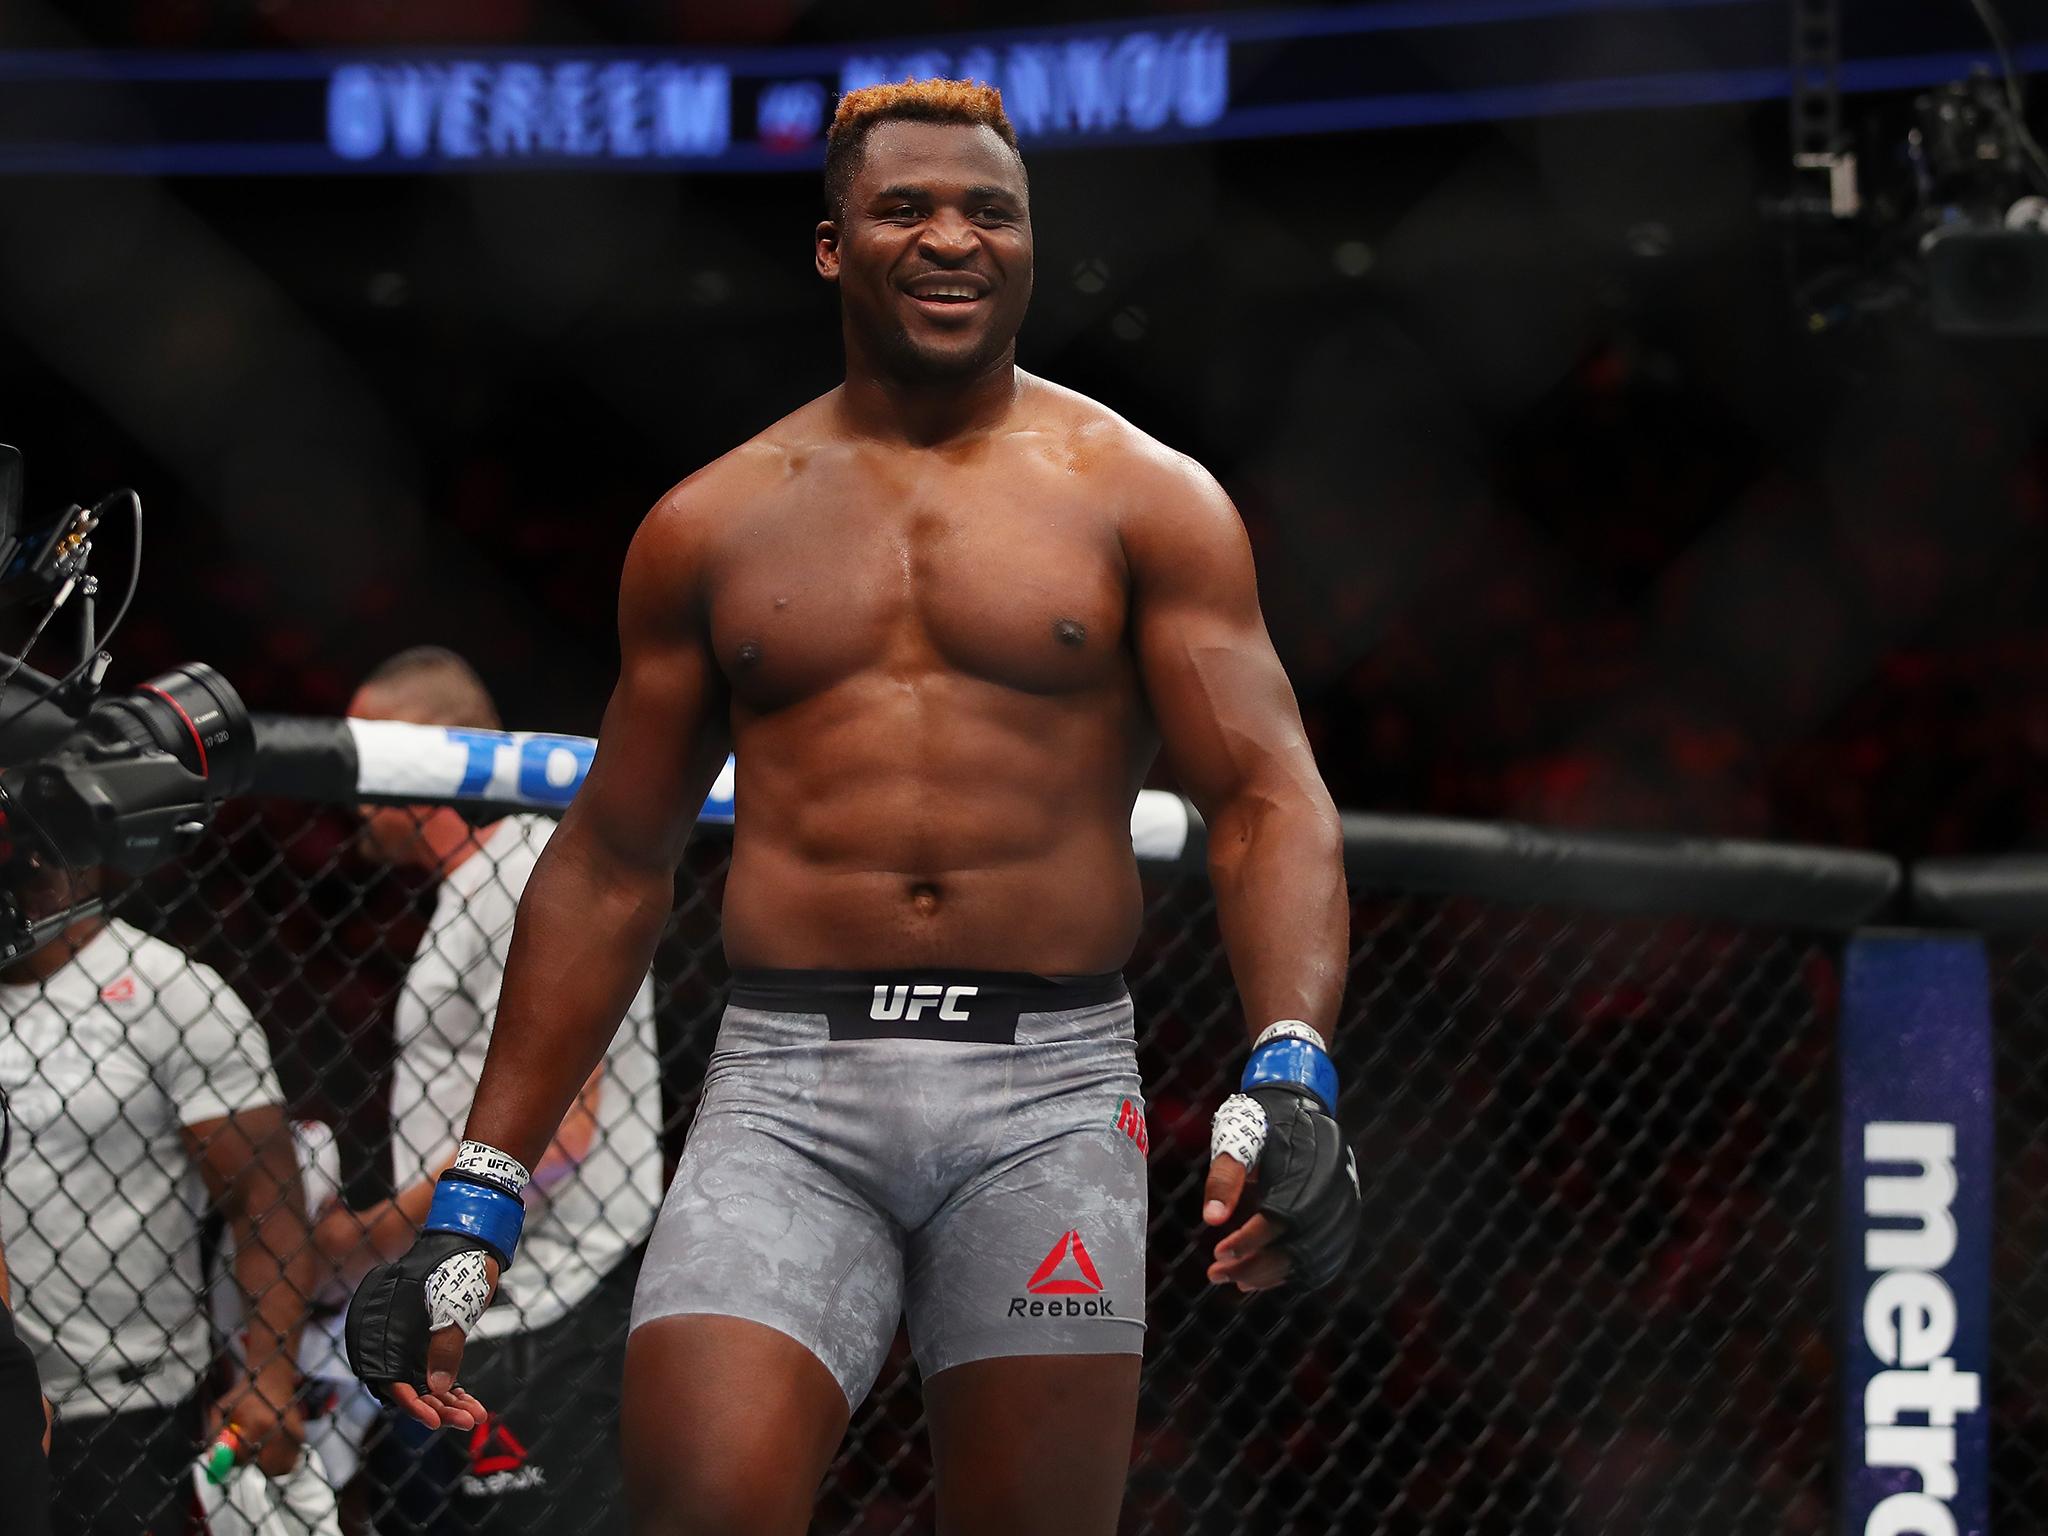 Francis Ngannou takes on Stipe Miocic for the UFC 220 for the heavyweight title